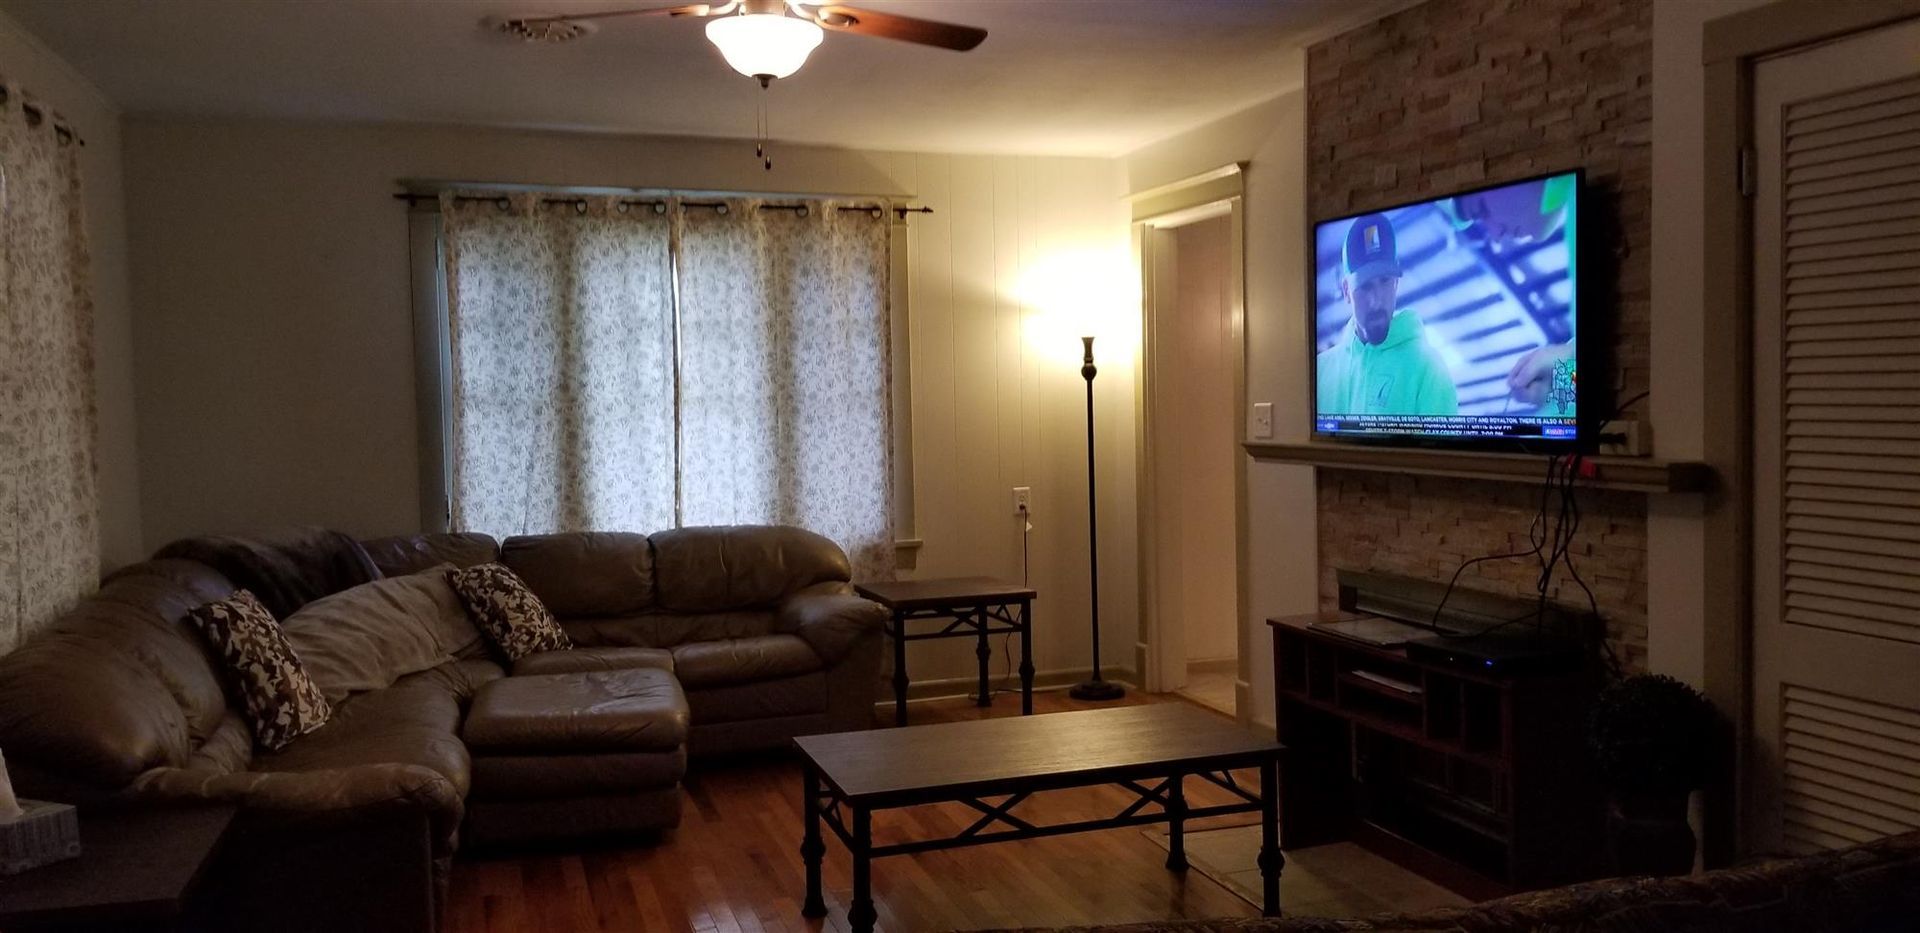 A living room filled with furniture and a flat screen tv.